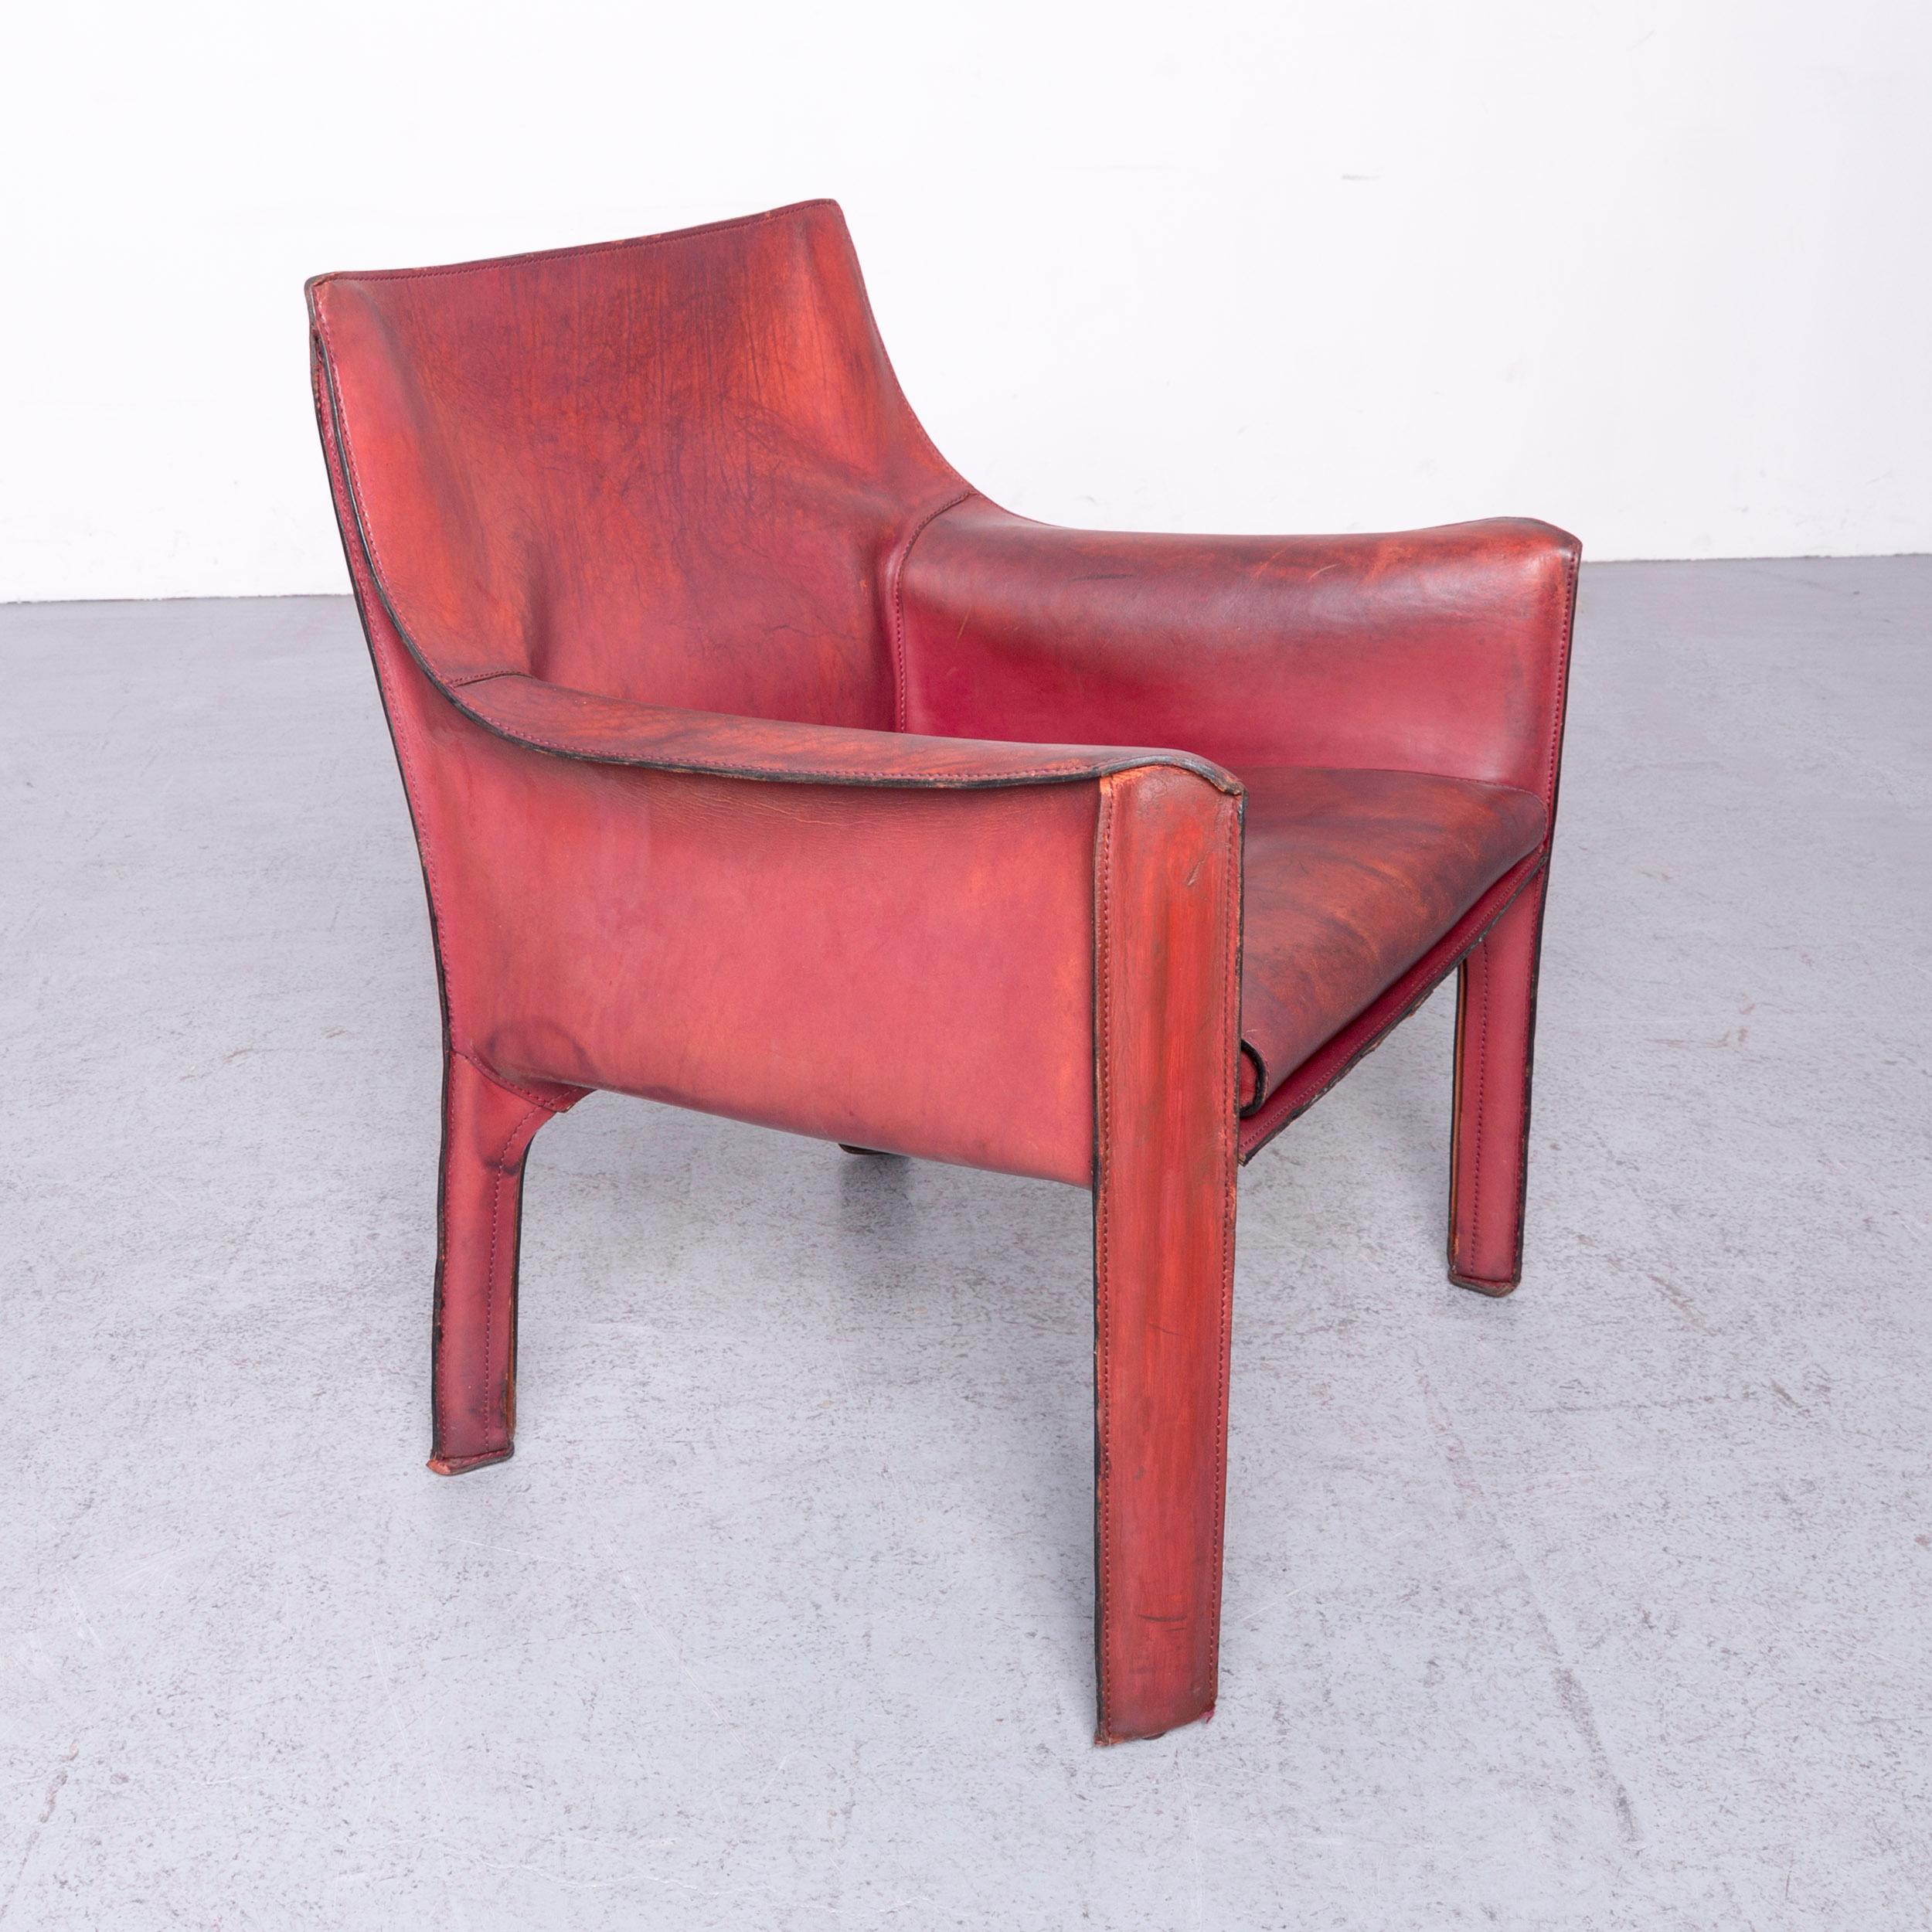 Italian Cassina Cab 414 Vintage Leather Armchair Red by Mario Belinni 1970-1979